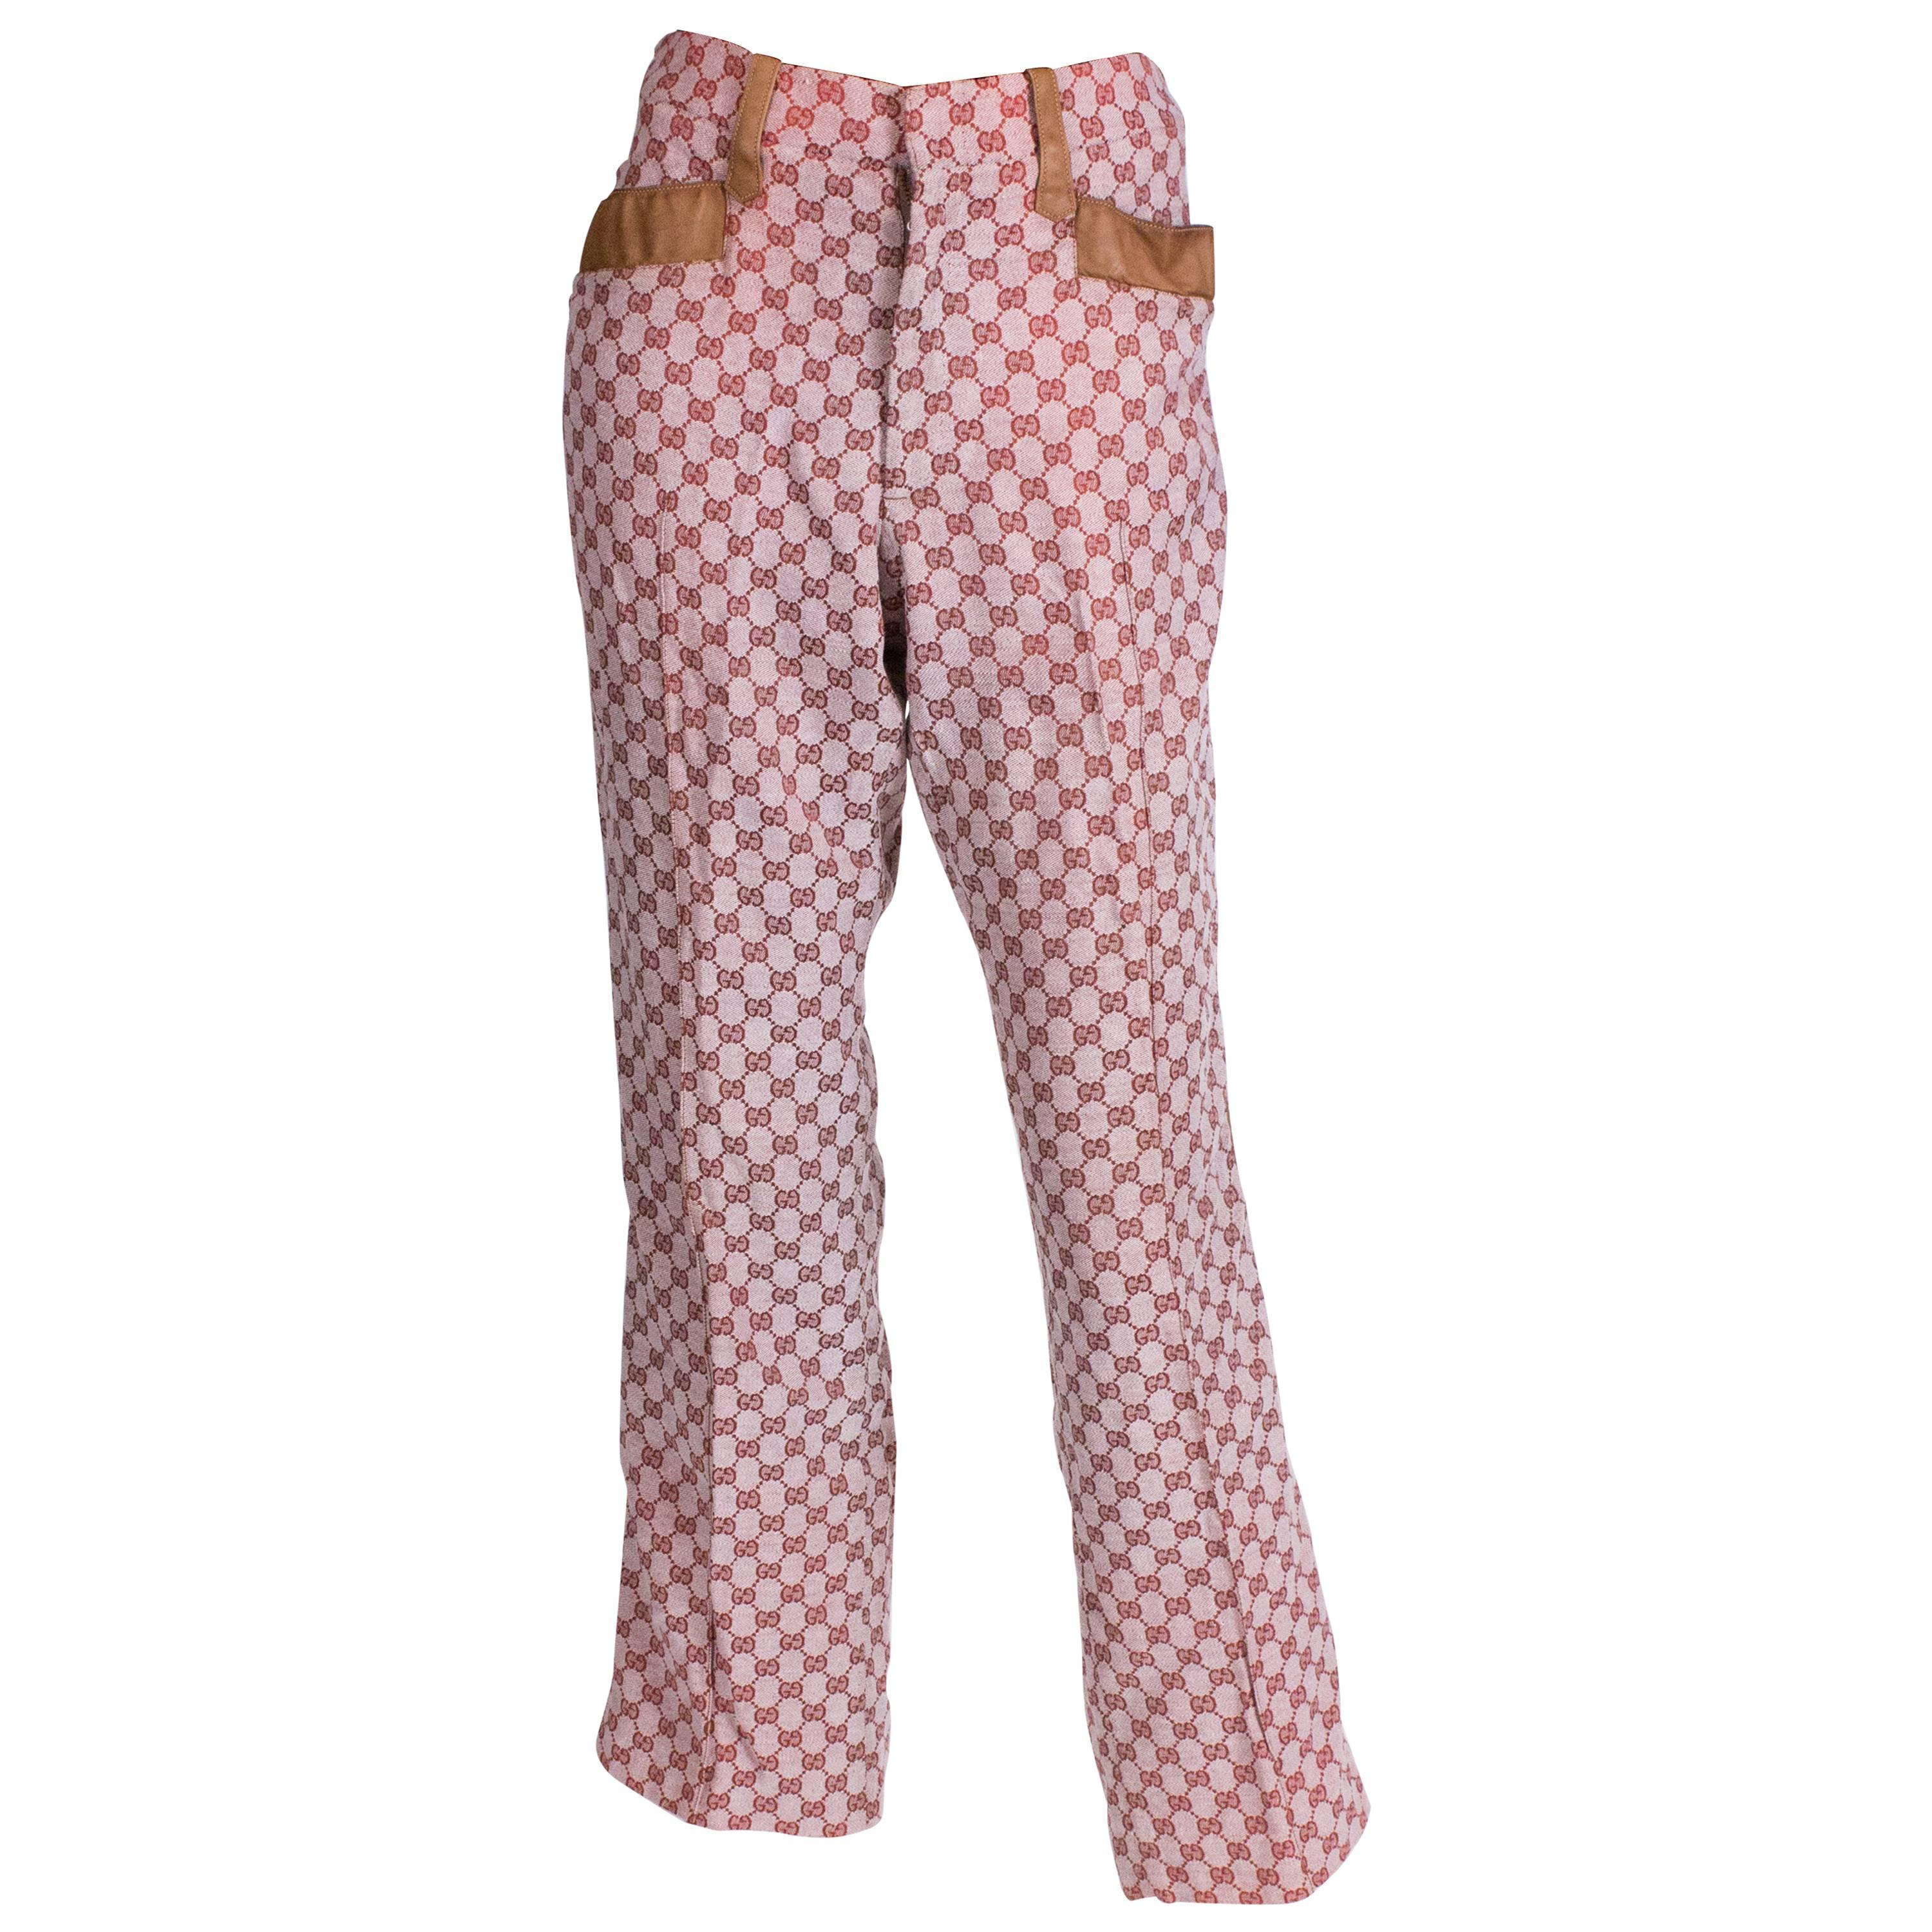 1970/1980s Gucci trousers